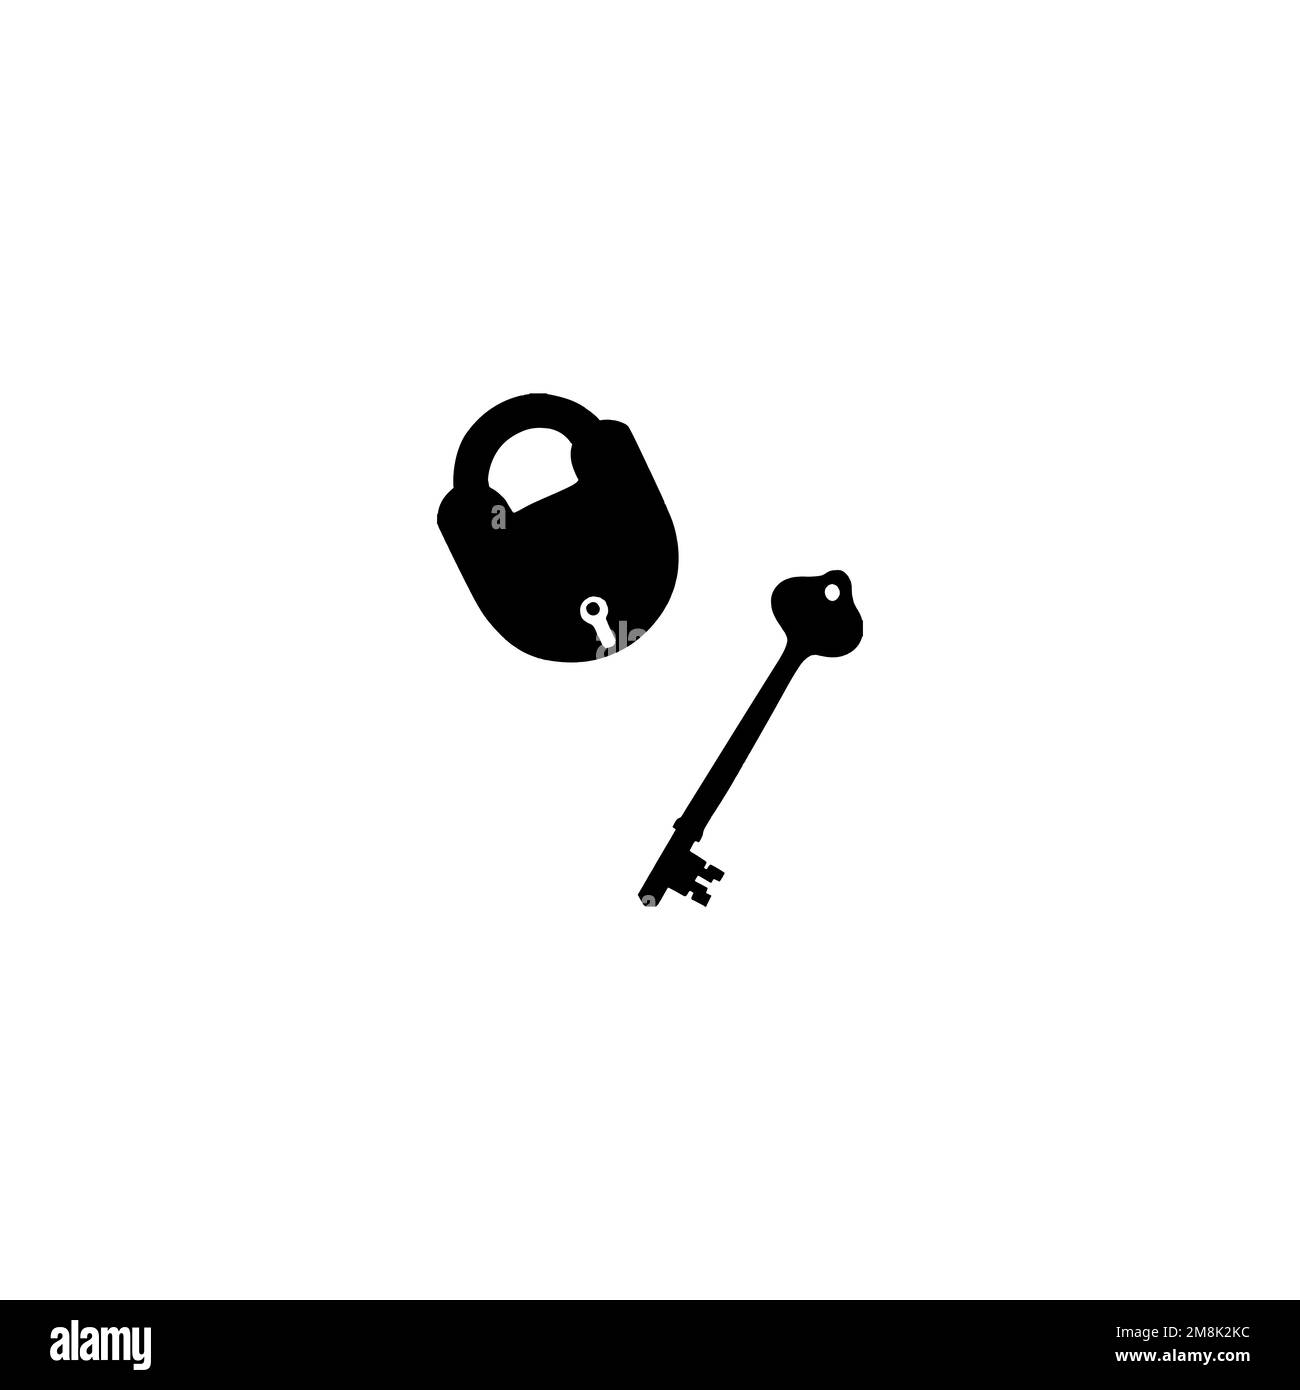 Lock and key icon. Simple style locksmith big sale poster background symbol. Lock and key brand logo design element. Lock and key t-shirt printing. Stock Vector